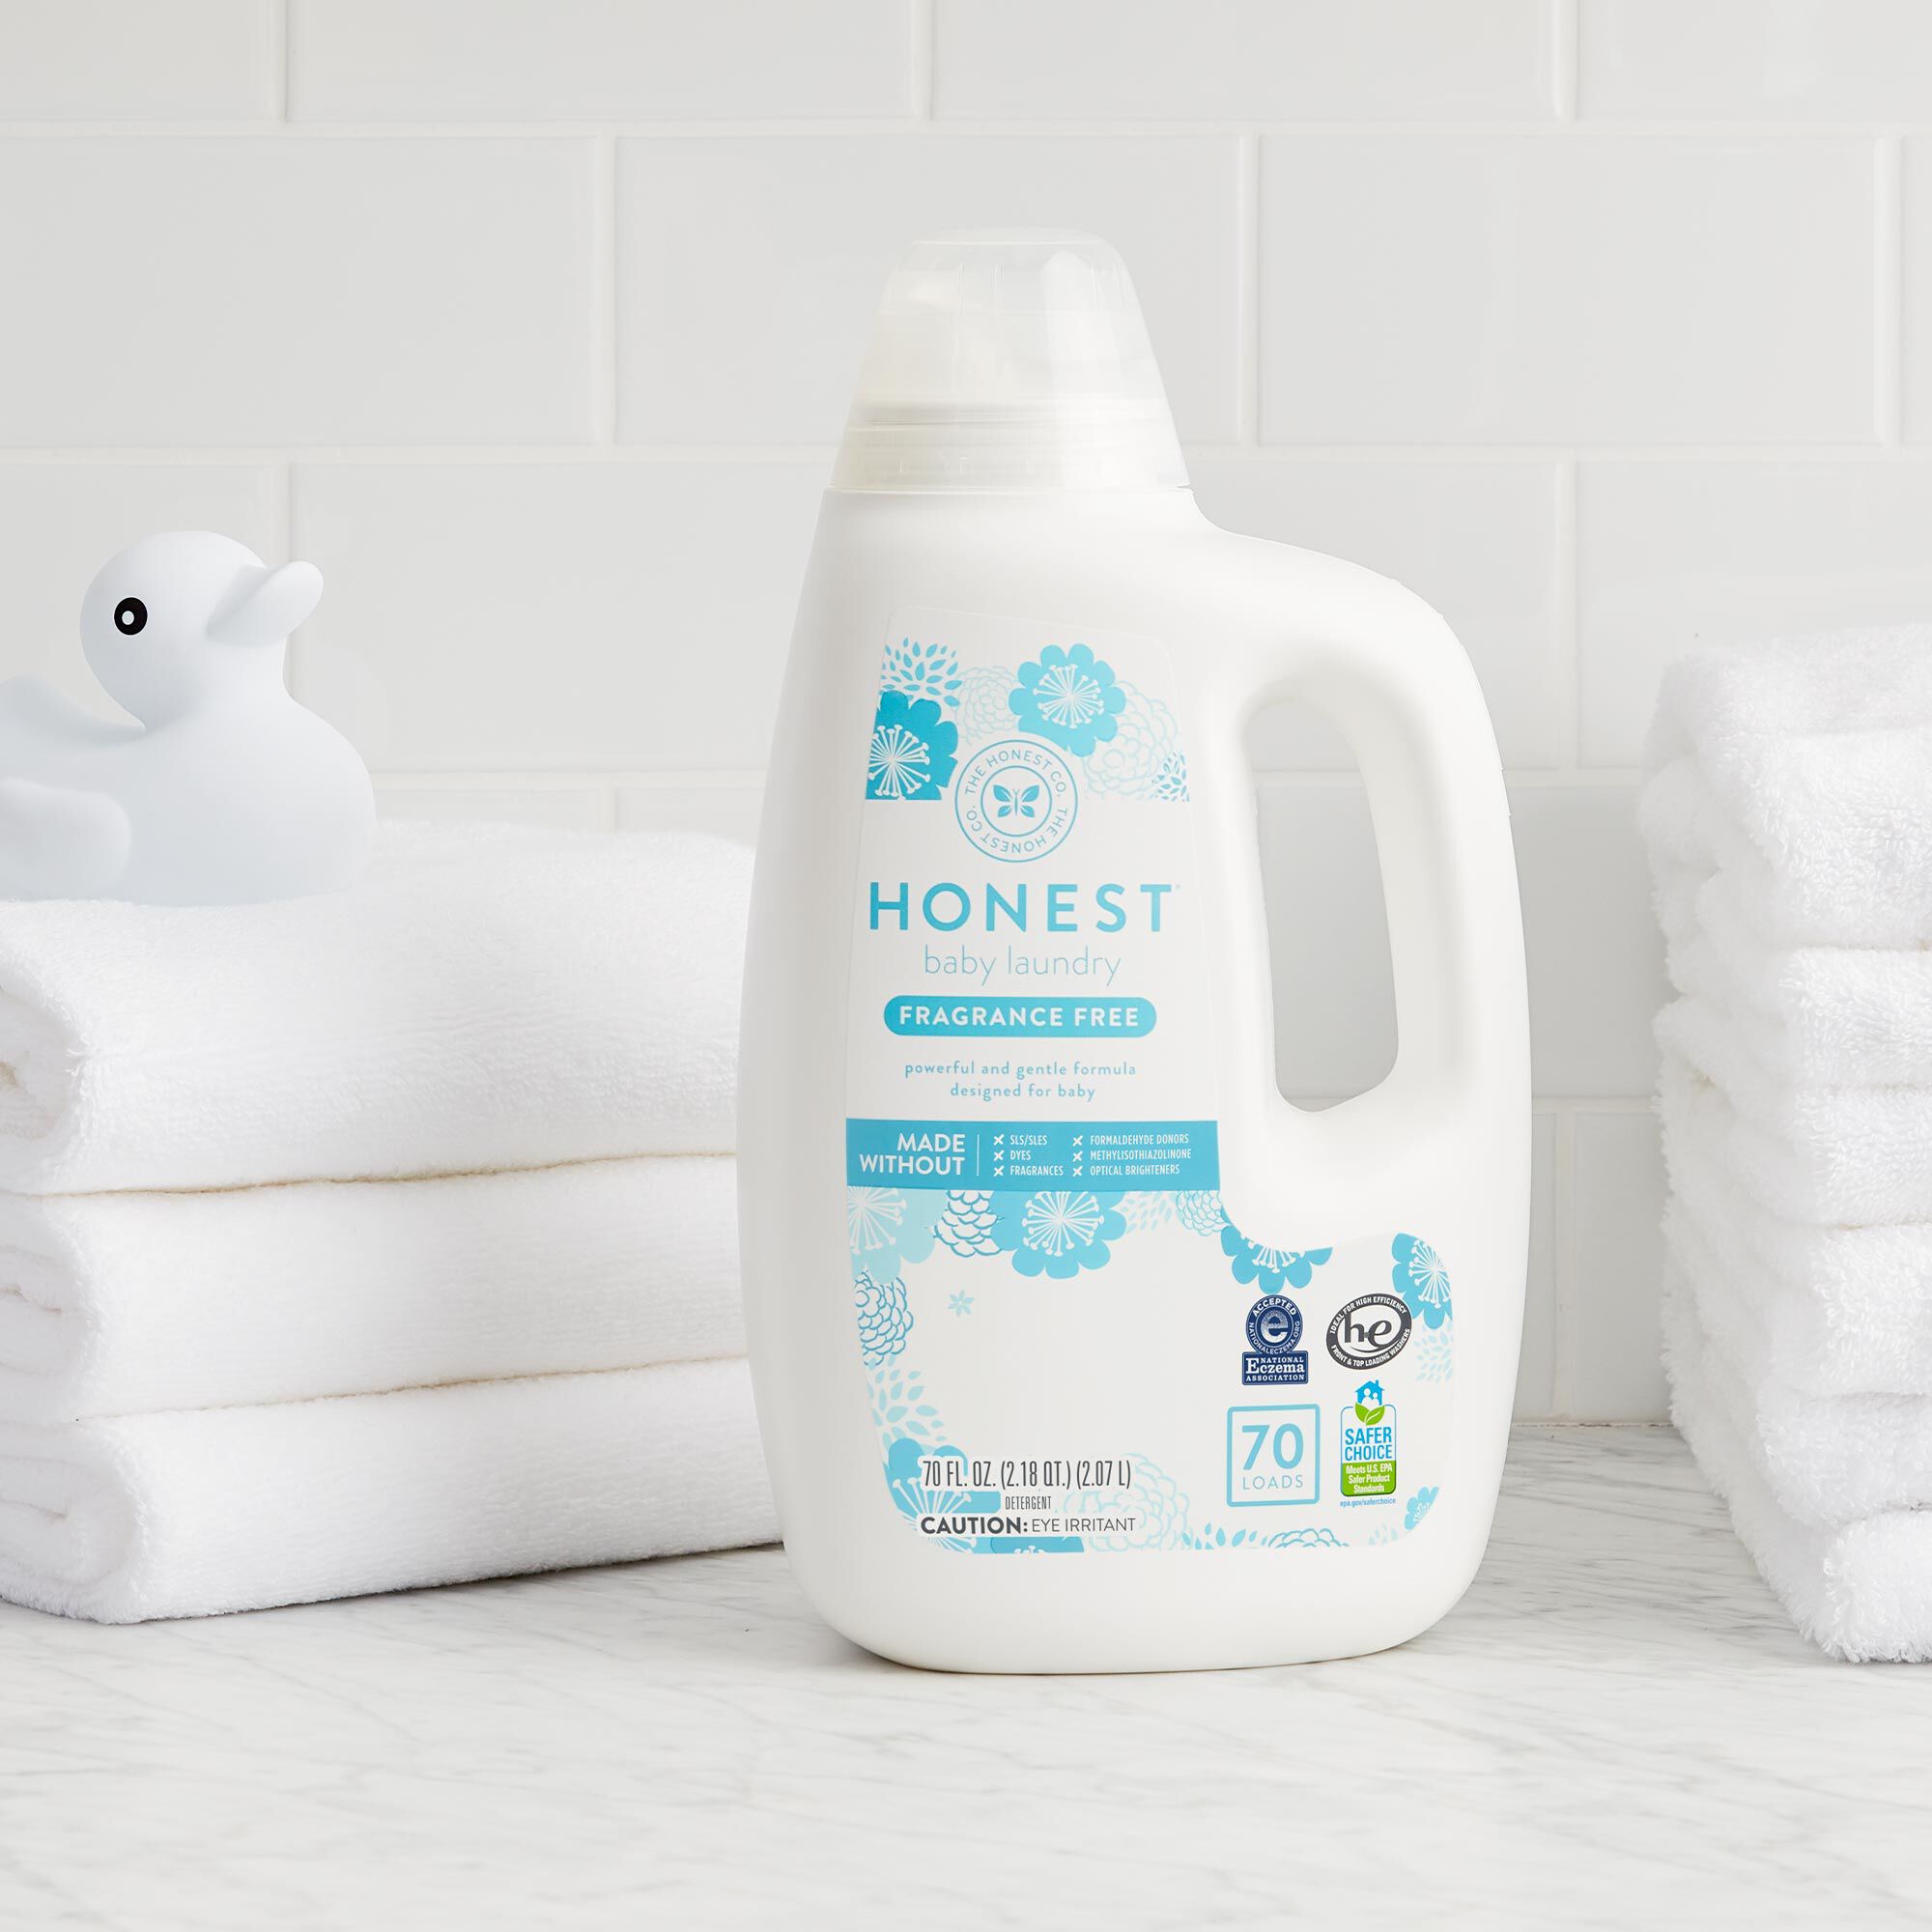 Fragrance-free laundry detergent from The Honest Company.